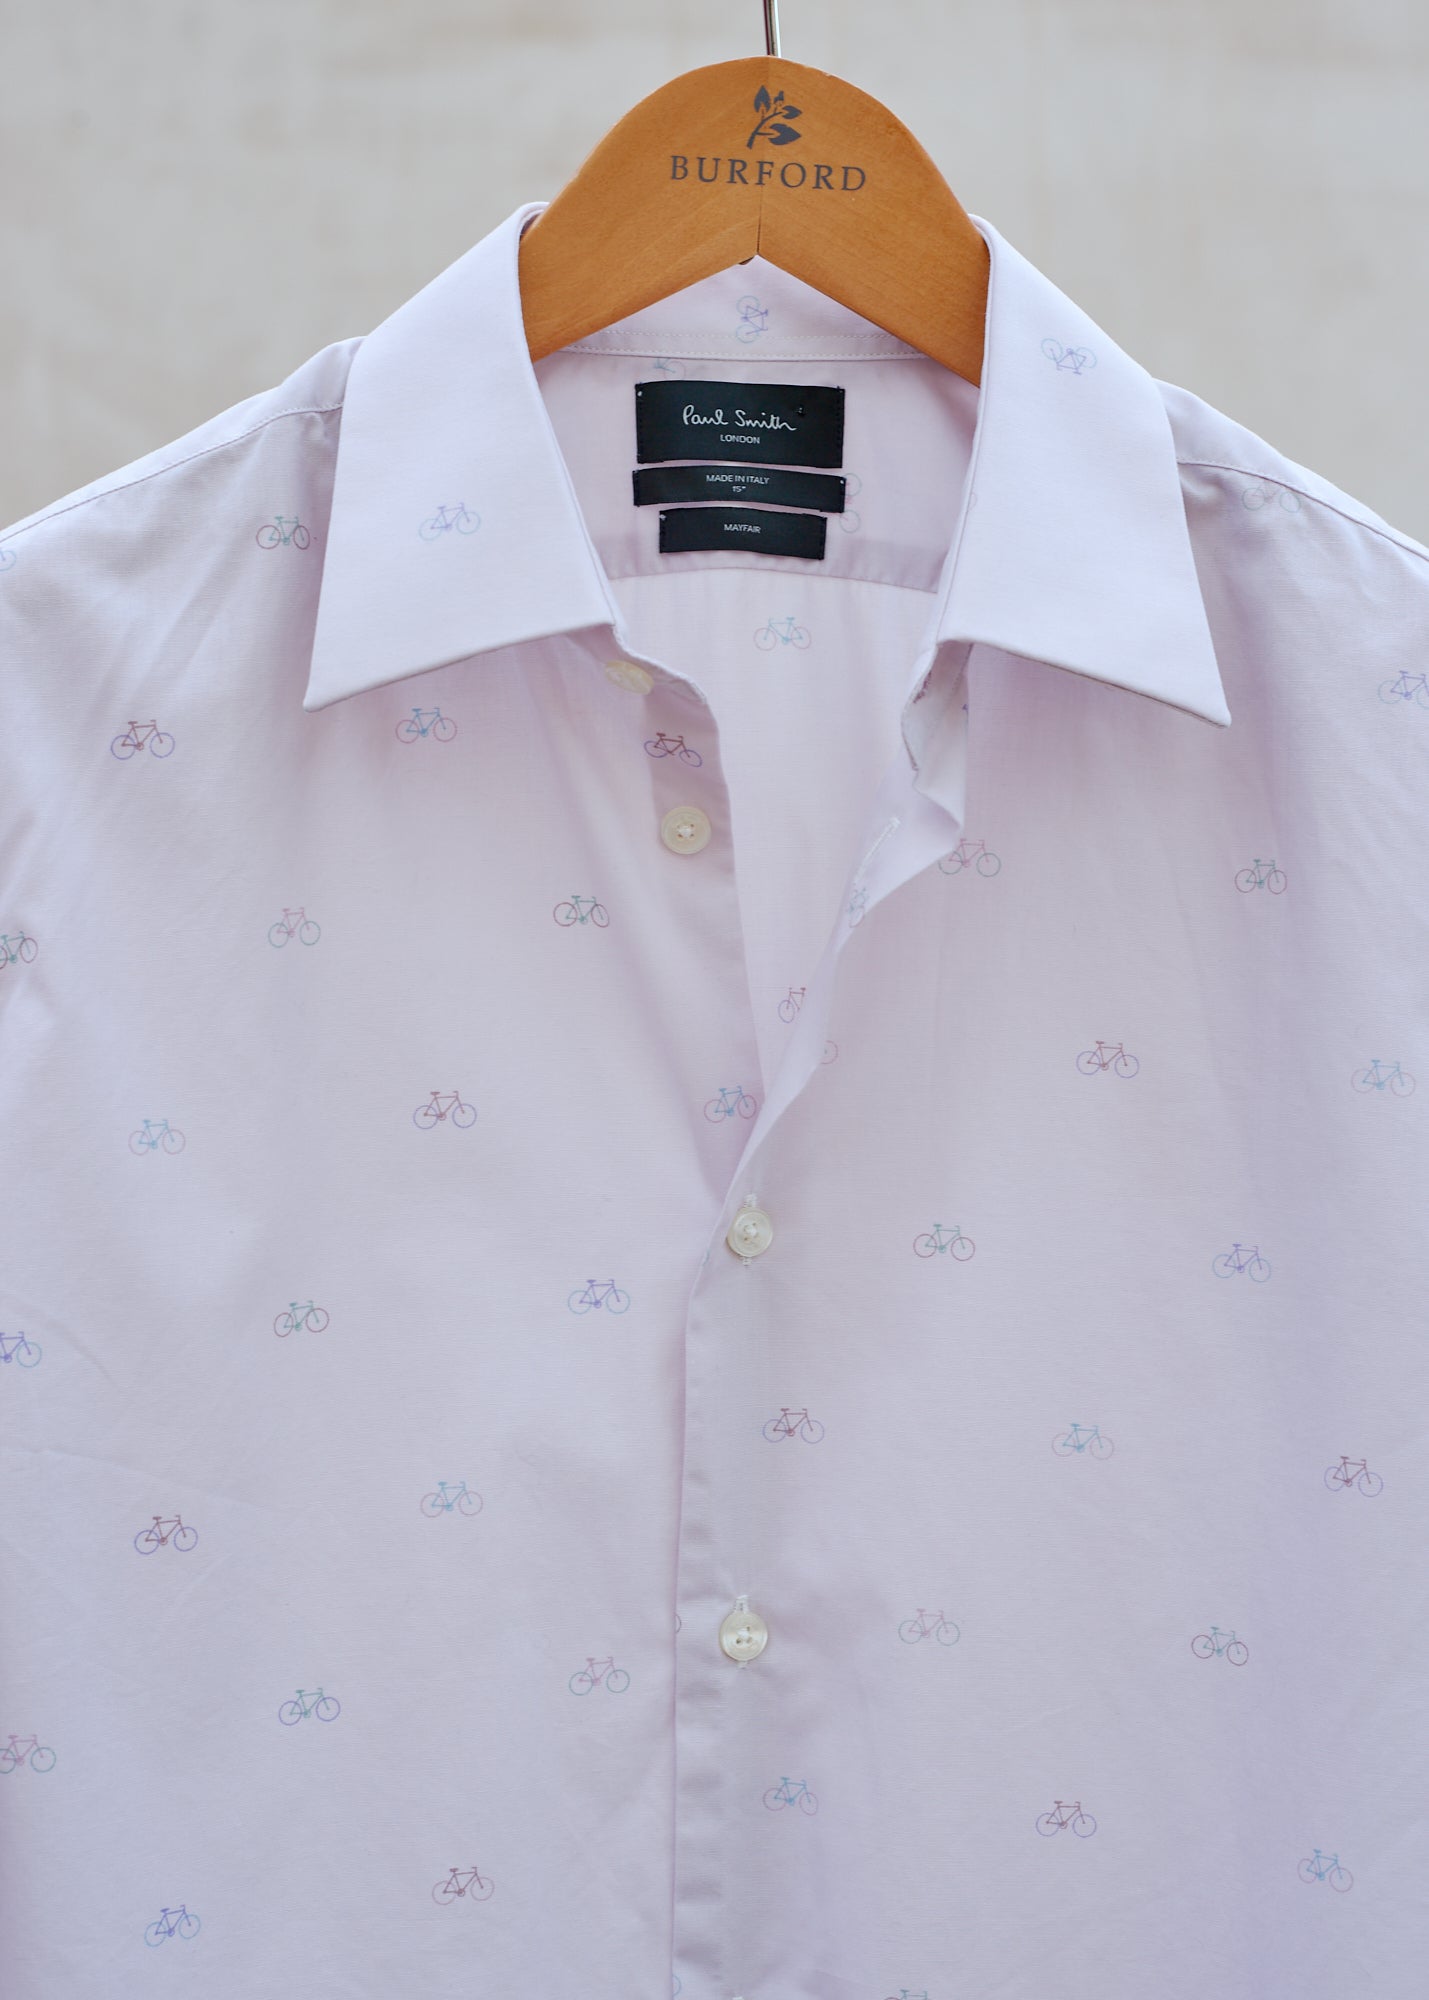 Paul Smith Light Pink Bicycle Patterned Shirt - M